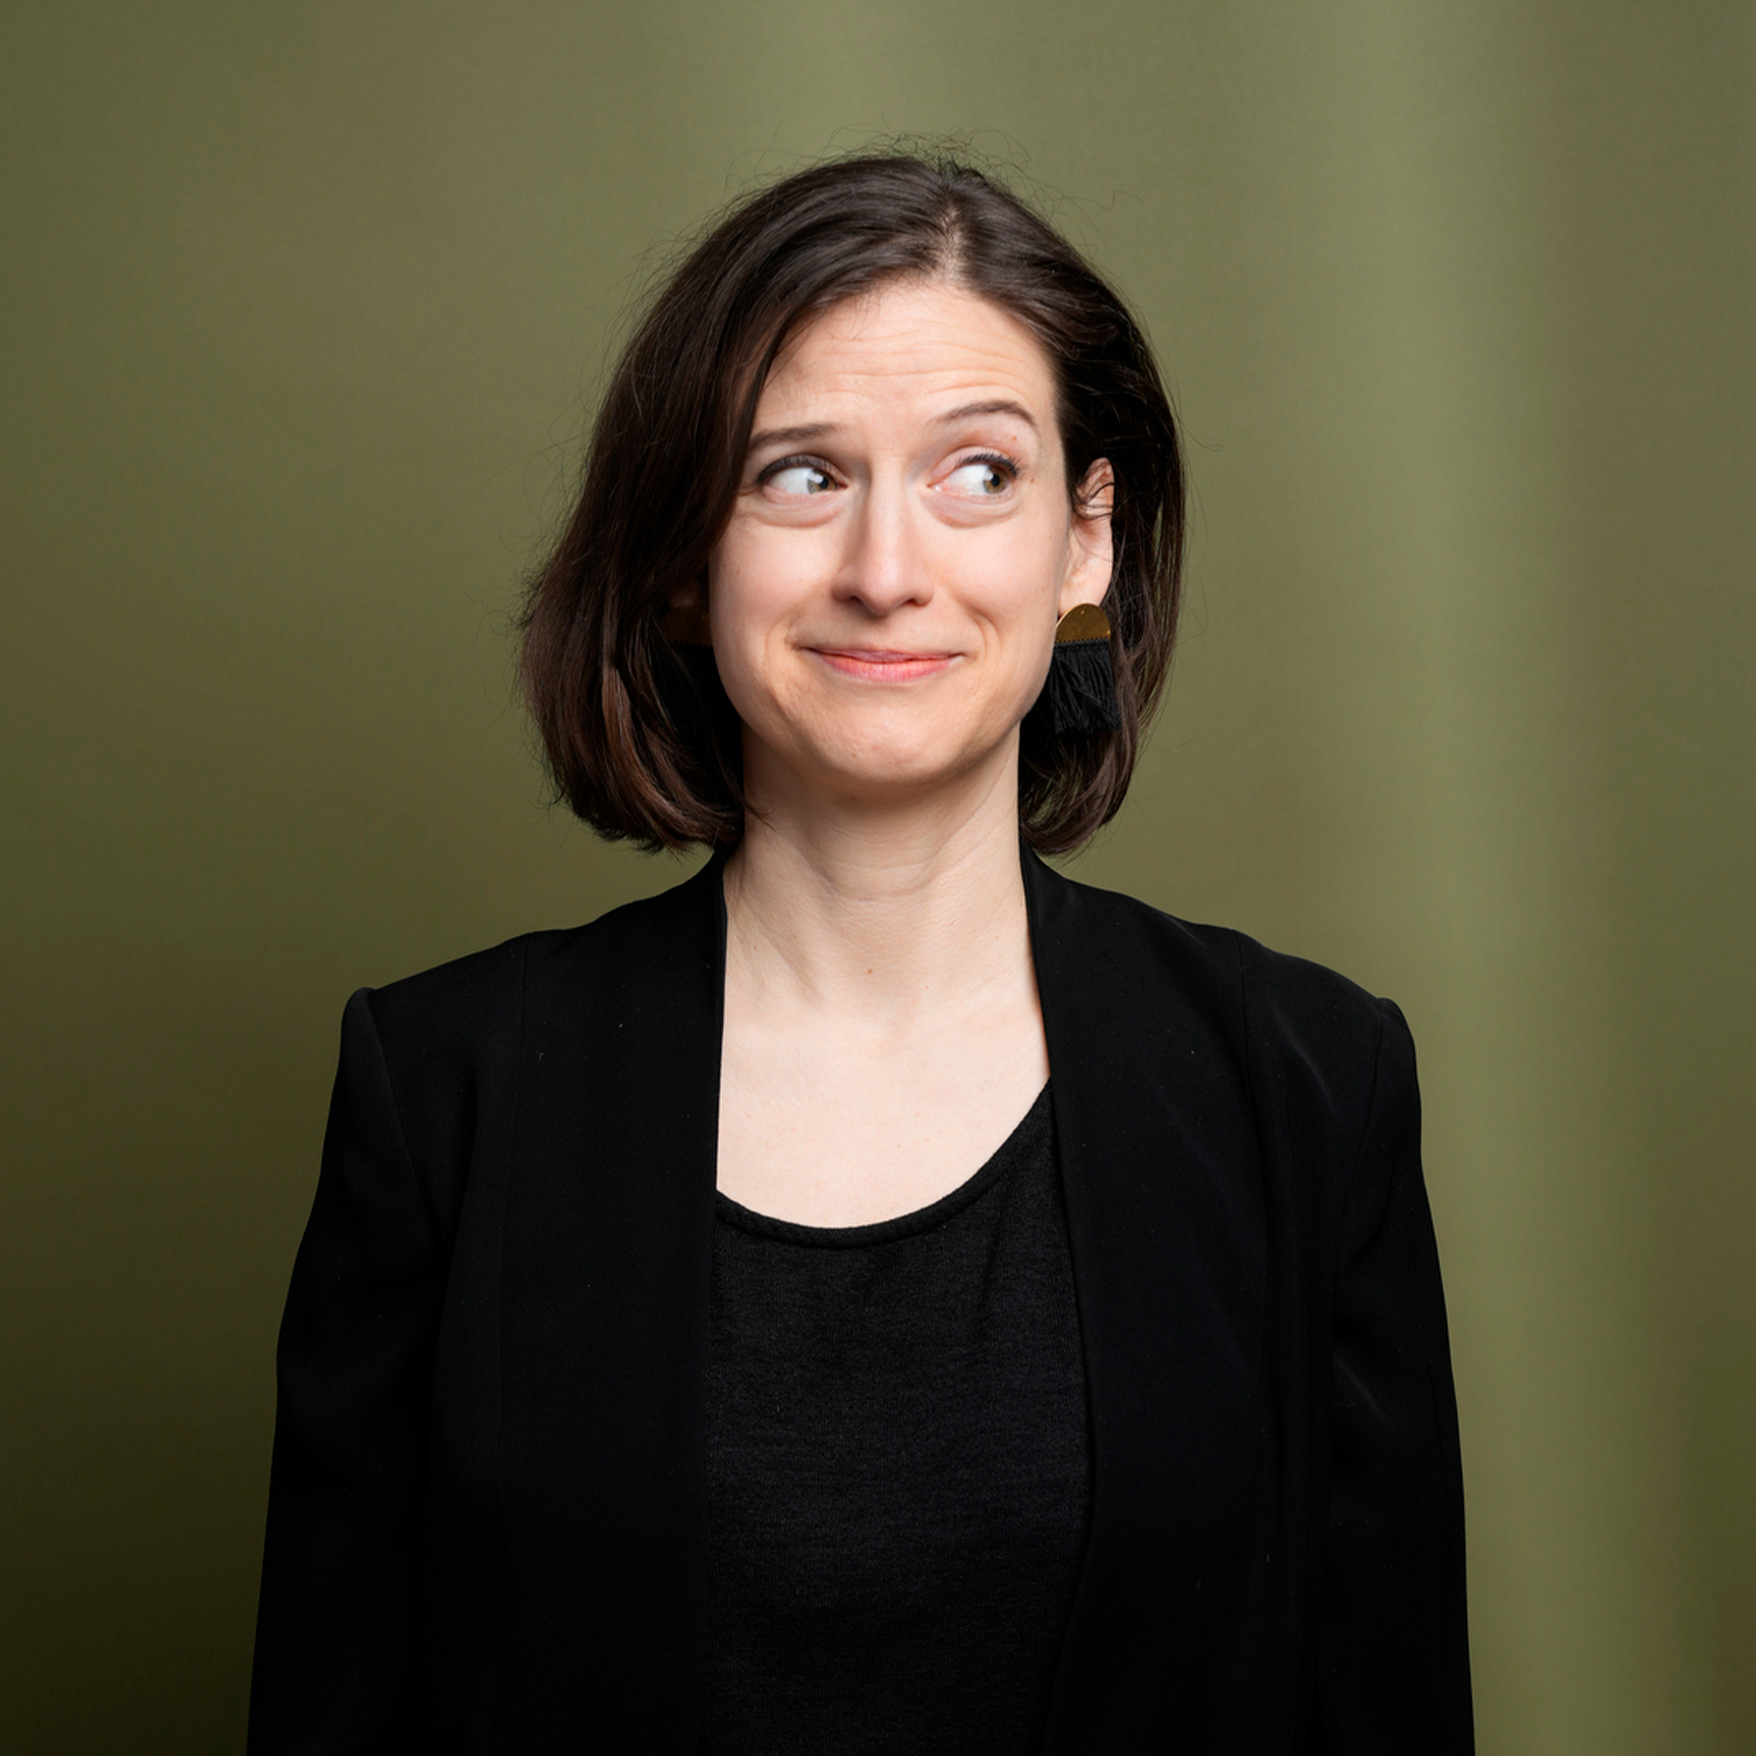 Headshot of Kate Murphy with green background